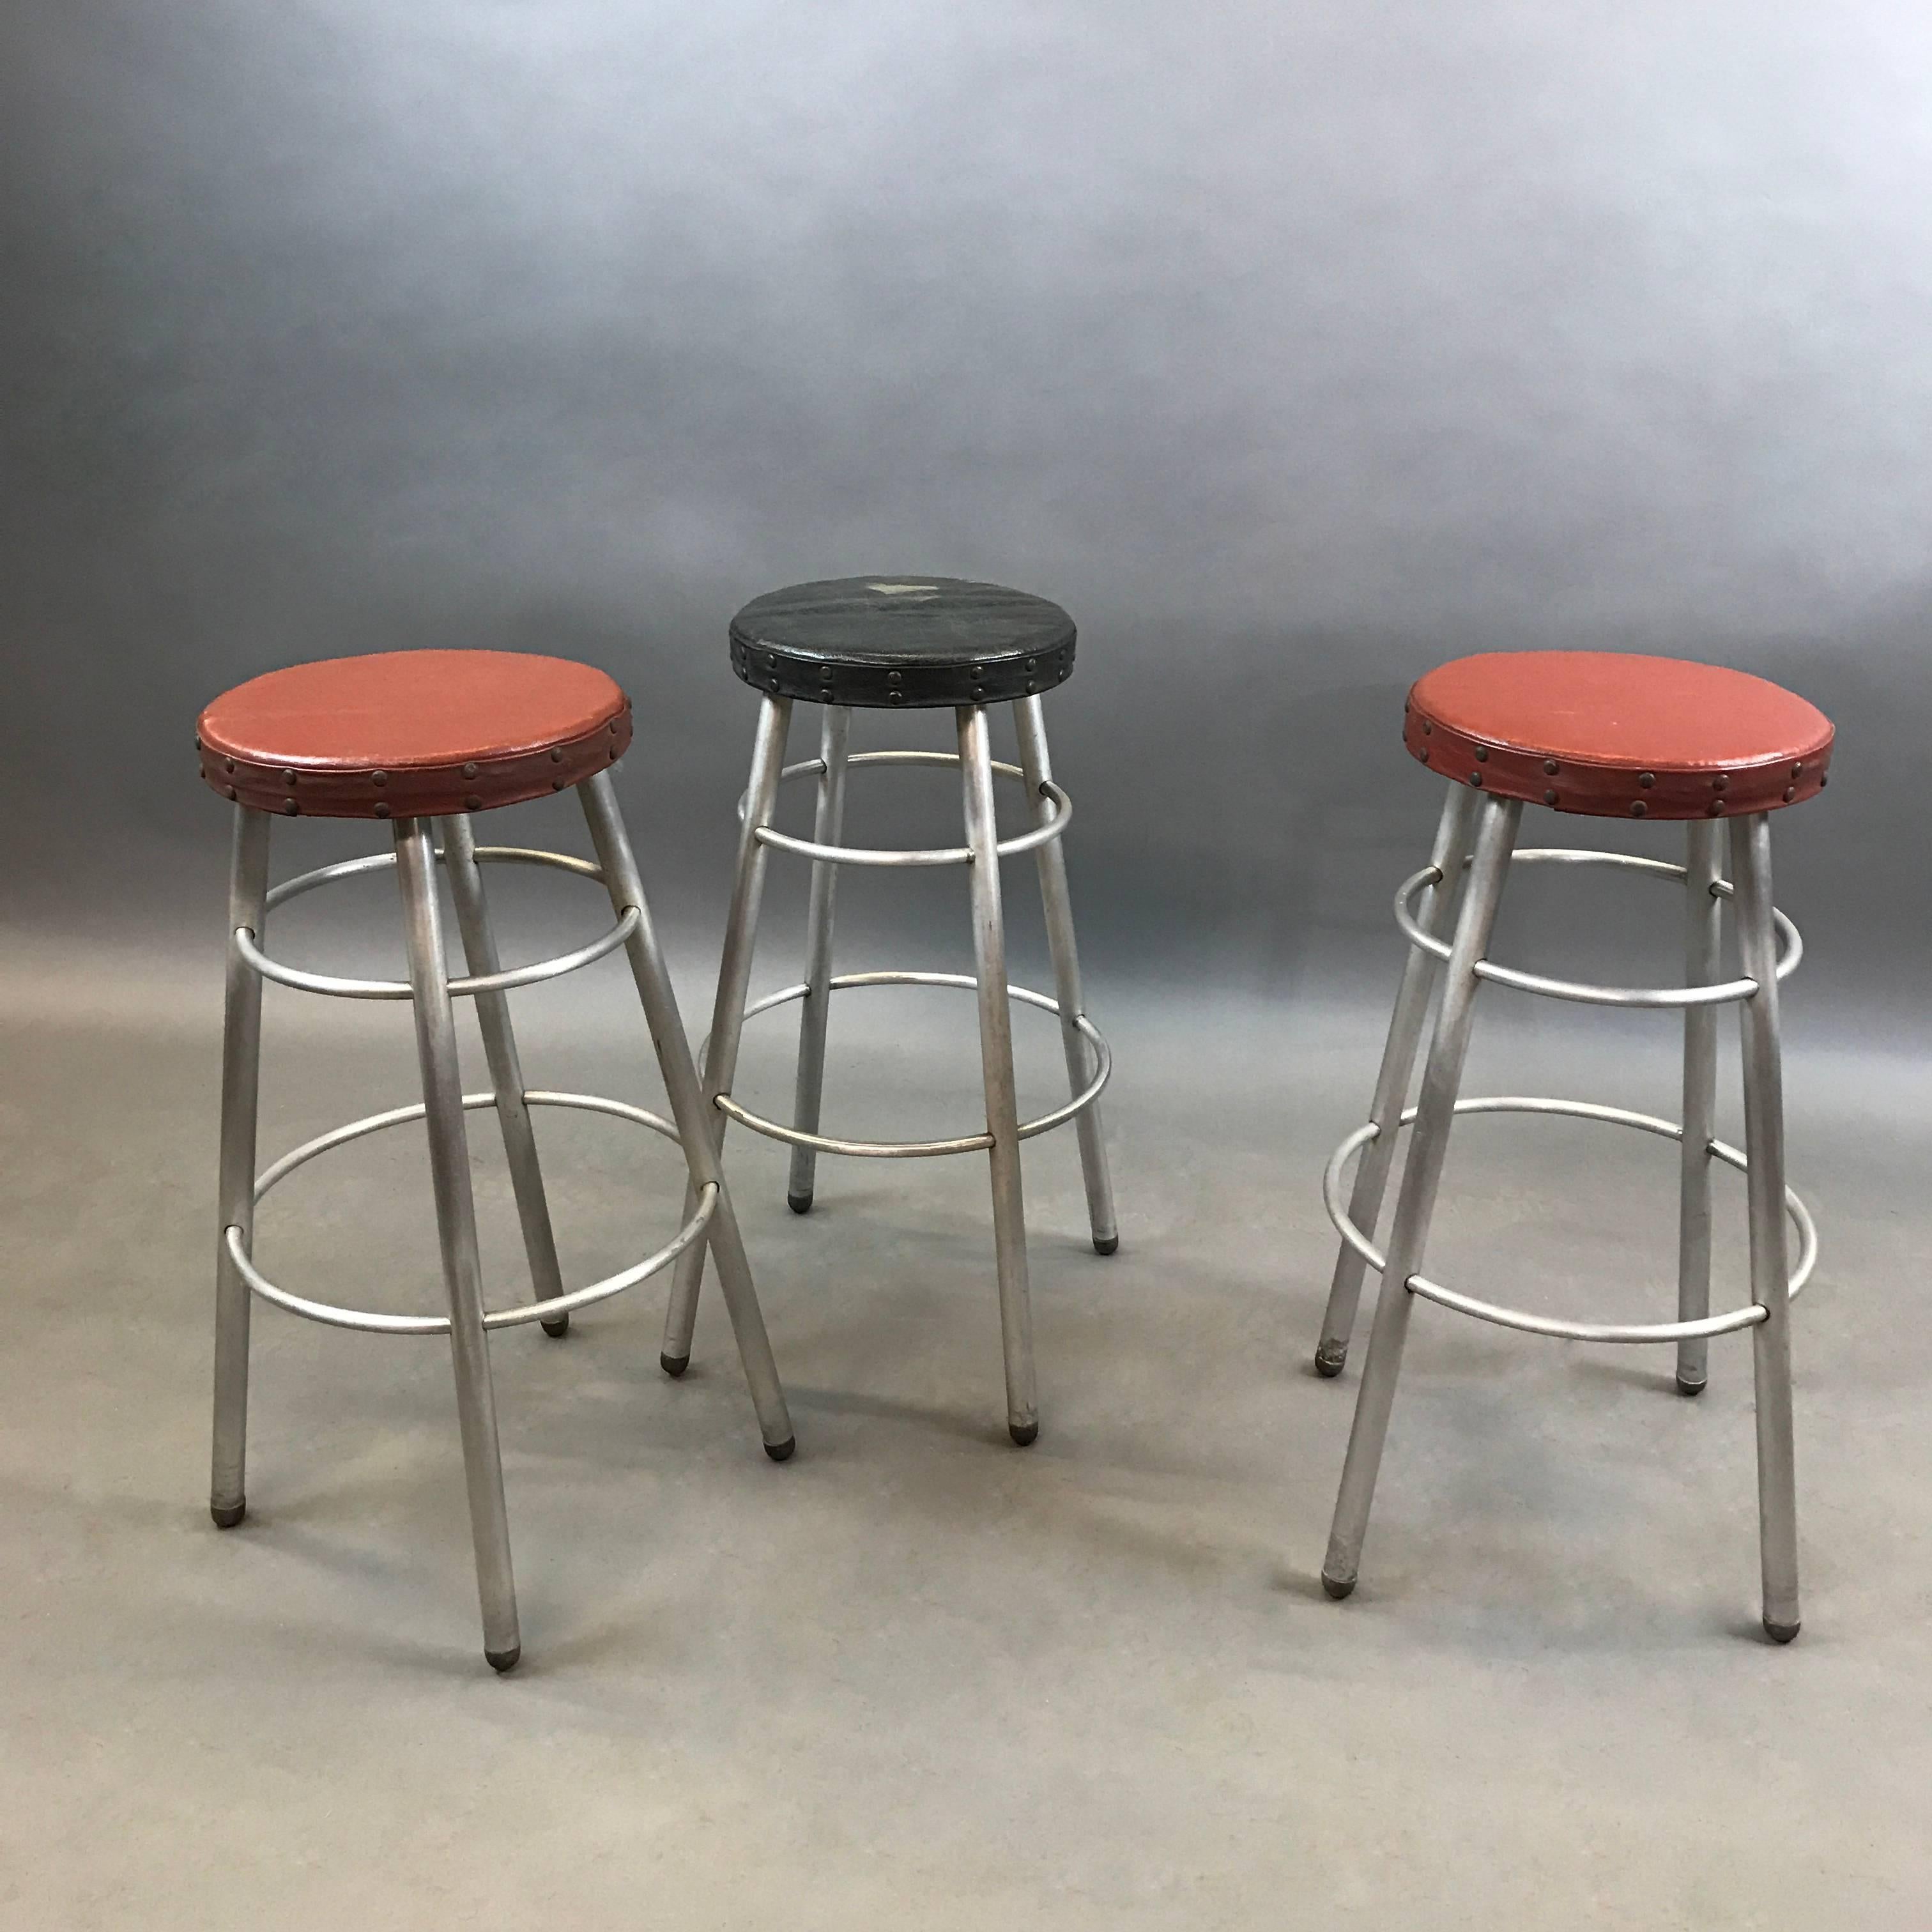 Set of three, machine age, tubular aluminium counter height stools by Alcoa Aluminum Company with original vinyl seats with nailhead trim. Measures: The seat diameter is 12 inches and the footprint diameter is 19 inches.